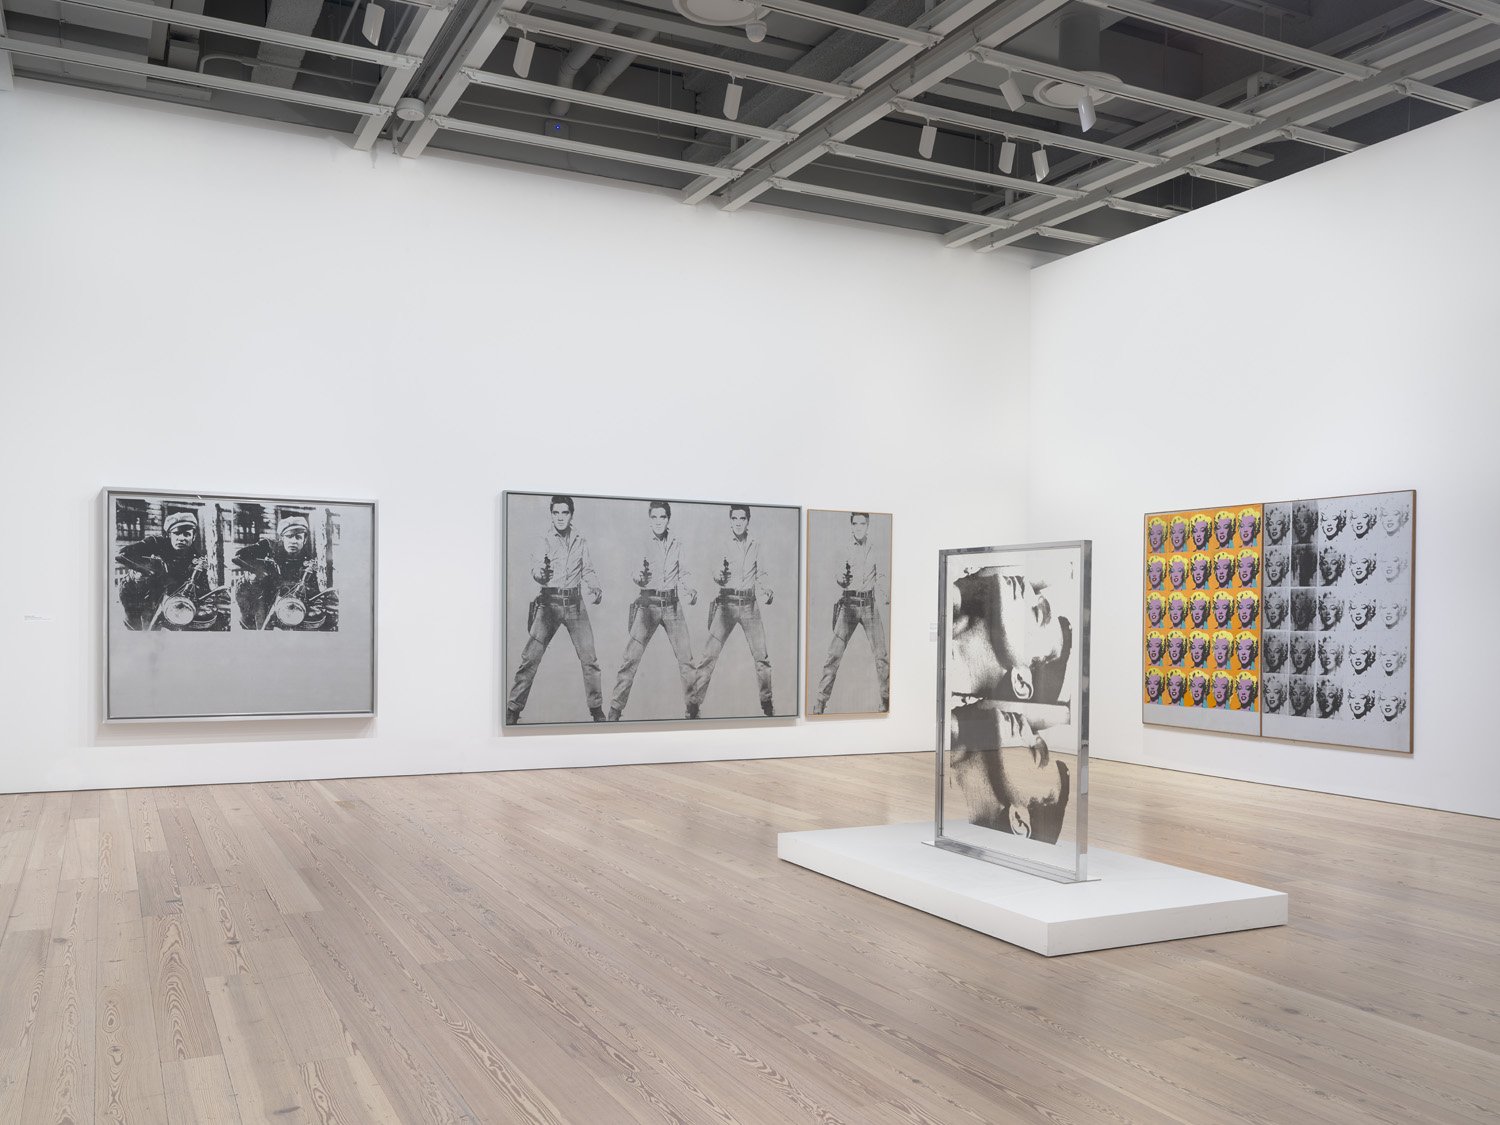 Installation view of Andy Warhol – From A to B and Back Again (Whitney Museum of American Art, New York, November 12, 2018-March 31, 2019). From left to right: Silver Marlon, 1963; Triple Elvis [Ferus Type], 1963; Single Elvis [Ferus Type], 1963; Large Sleep, 1965; Marilyn Diptych, 1962. Photograph by Ron Amstutz. © 2018 The Andy Warhol Foundation for the Visual Arts, Inc. / Licensed by Artists Rights Society (ARS), New York